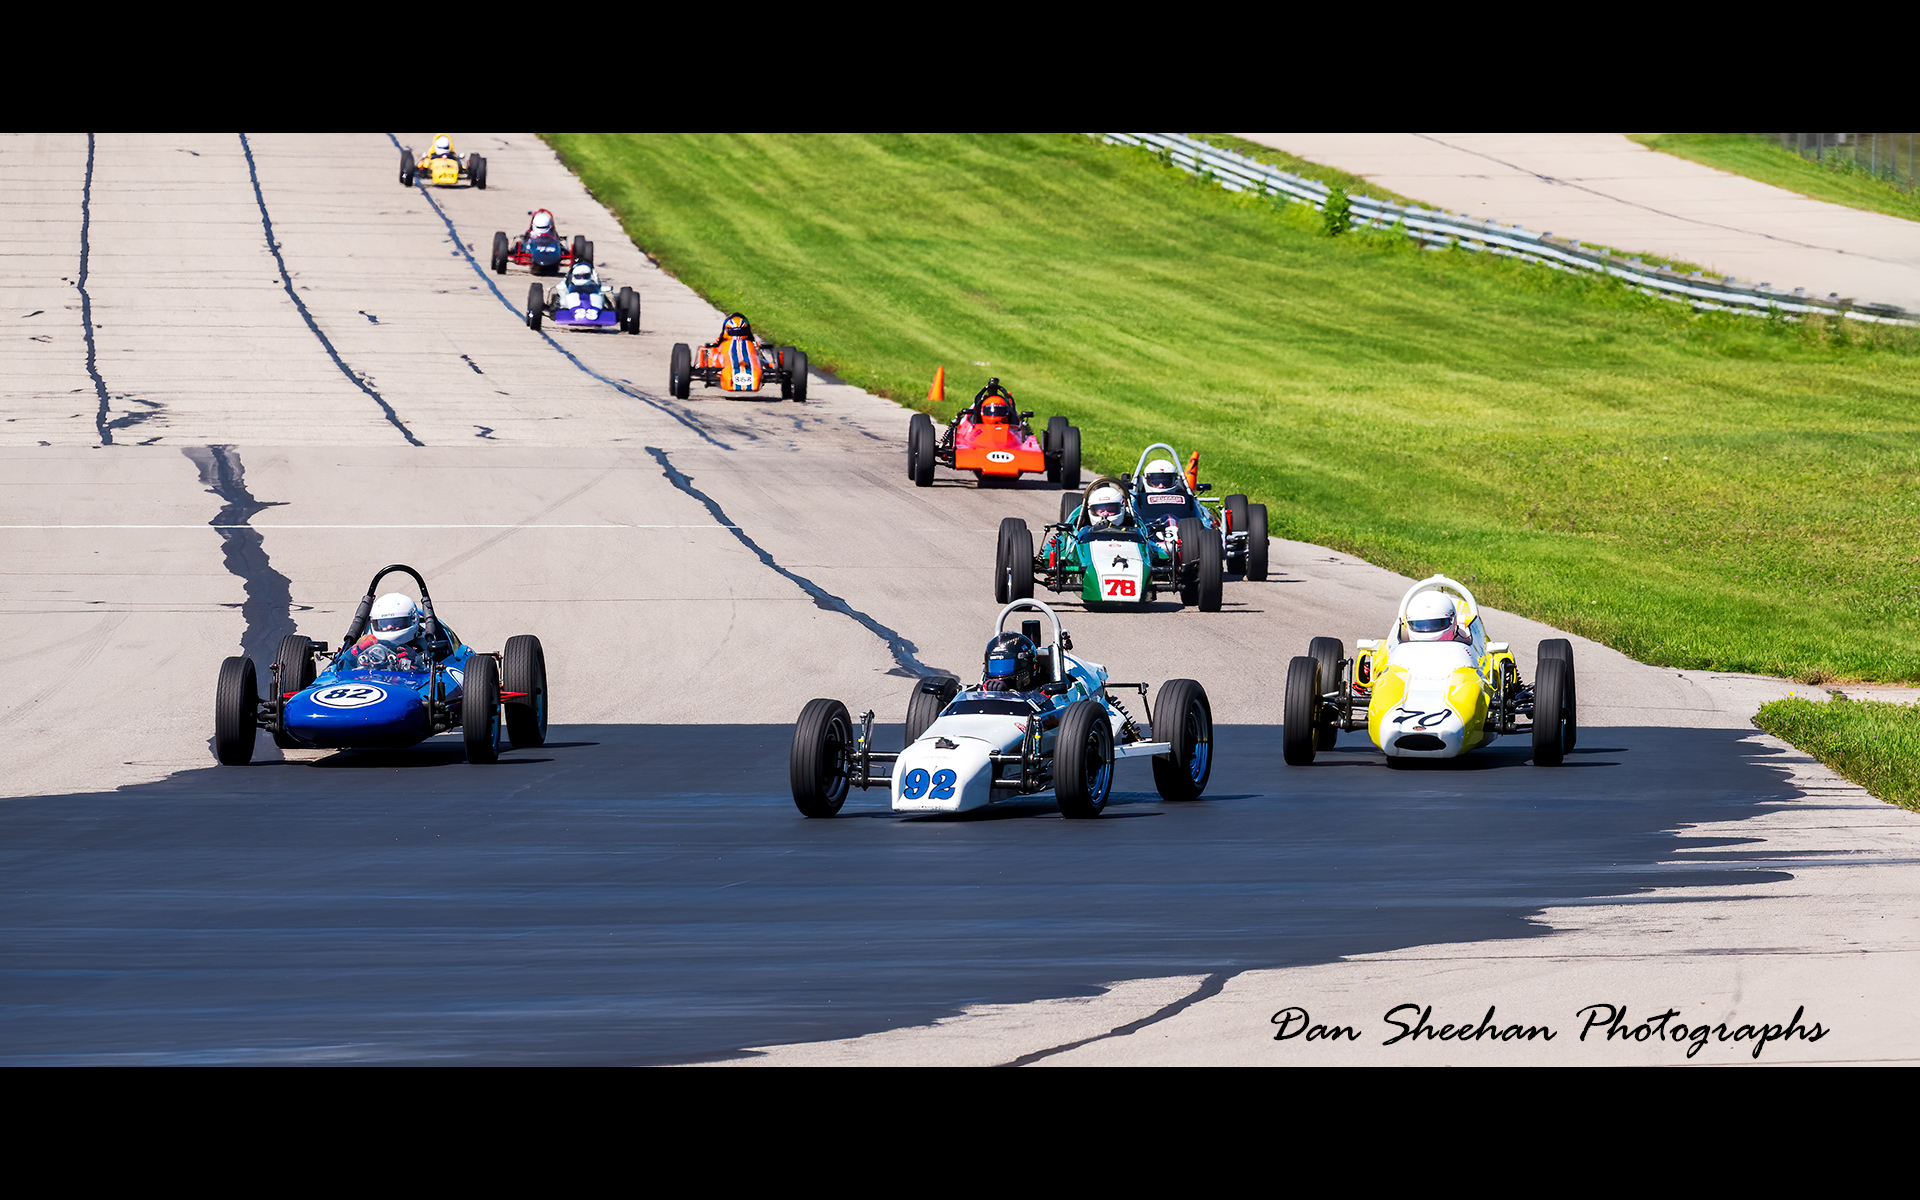 Always tight, exciting racing when the Formula Vee's hit the track. The VSCDA event at Grattan was no exception. : Cars : Dan Sheehan Photographs - Fine Art Stock Photography